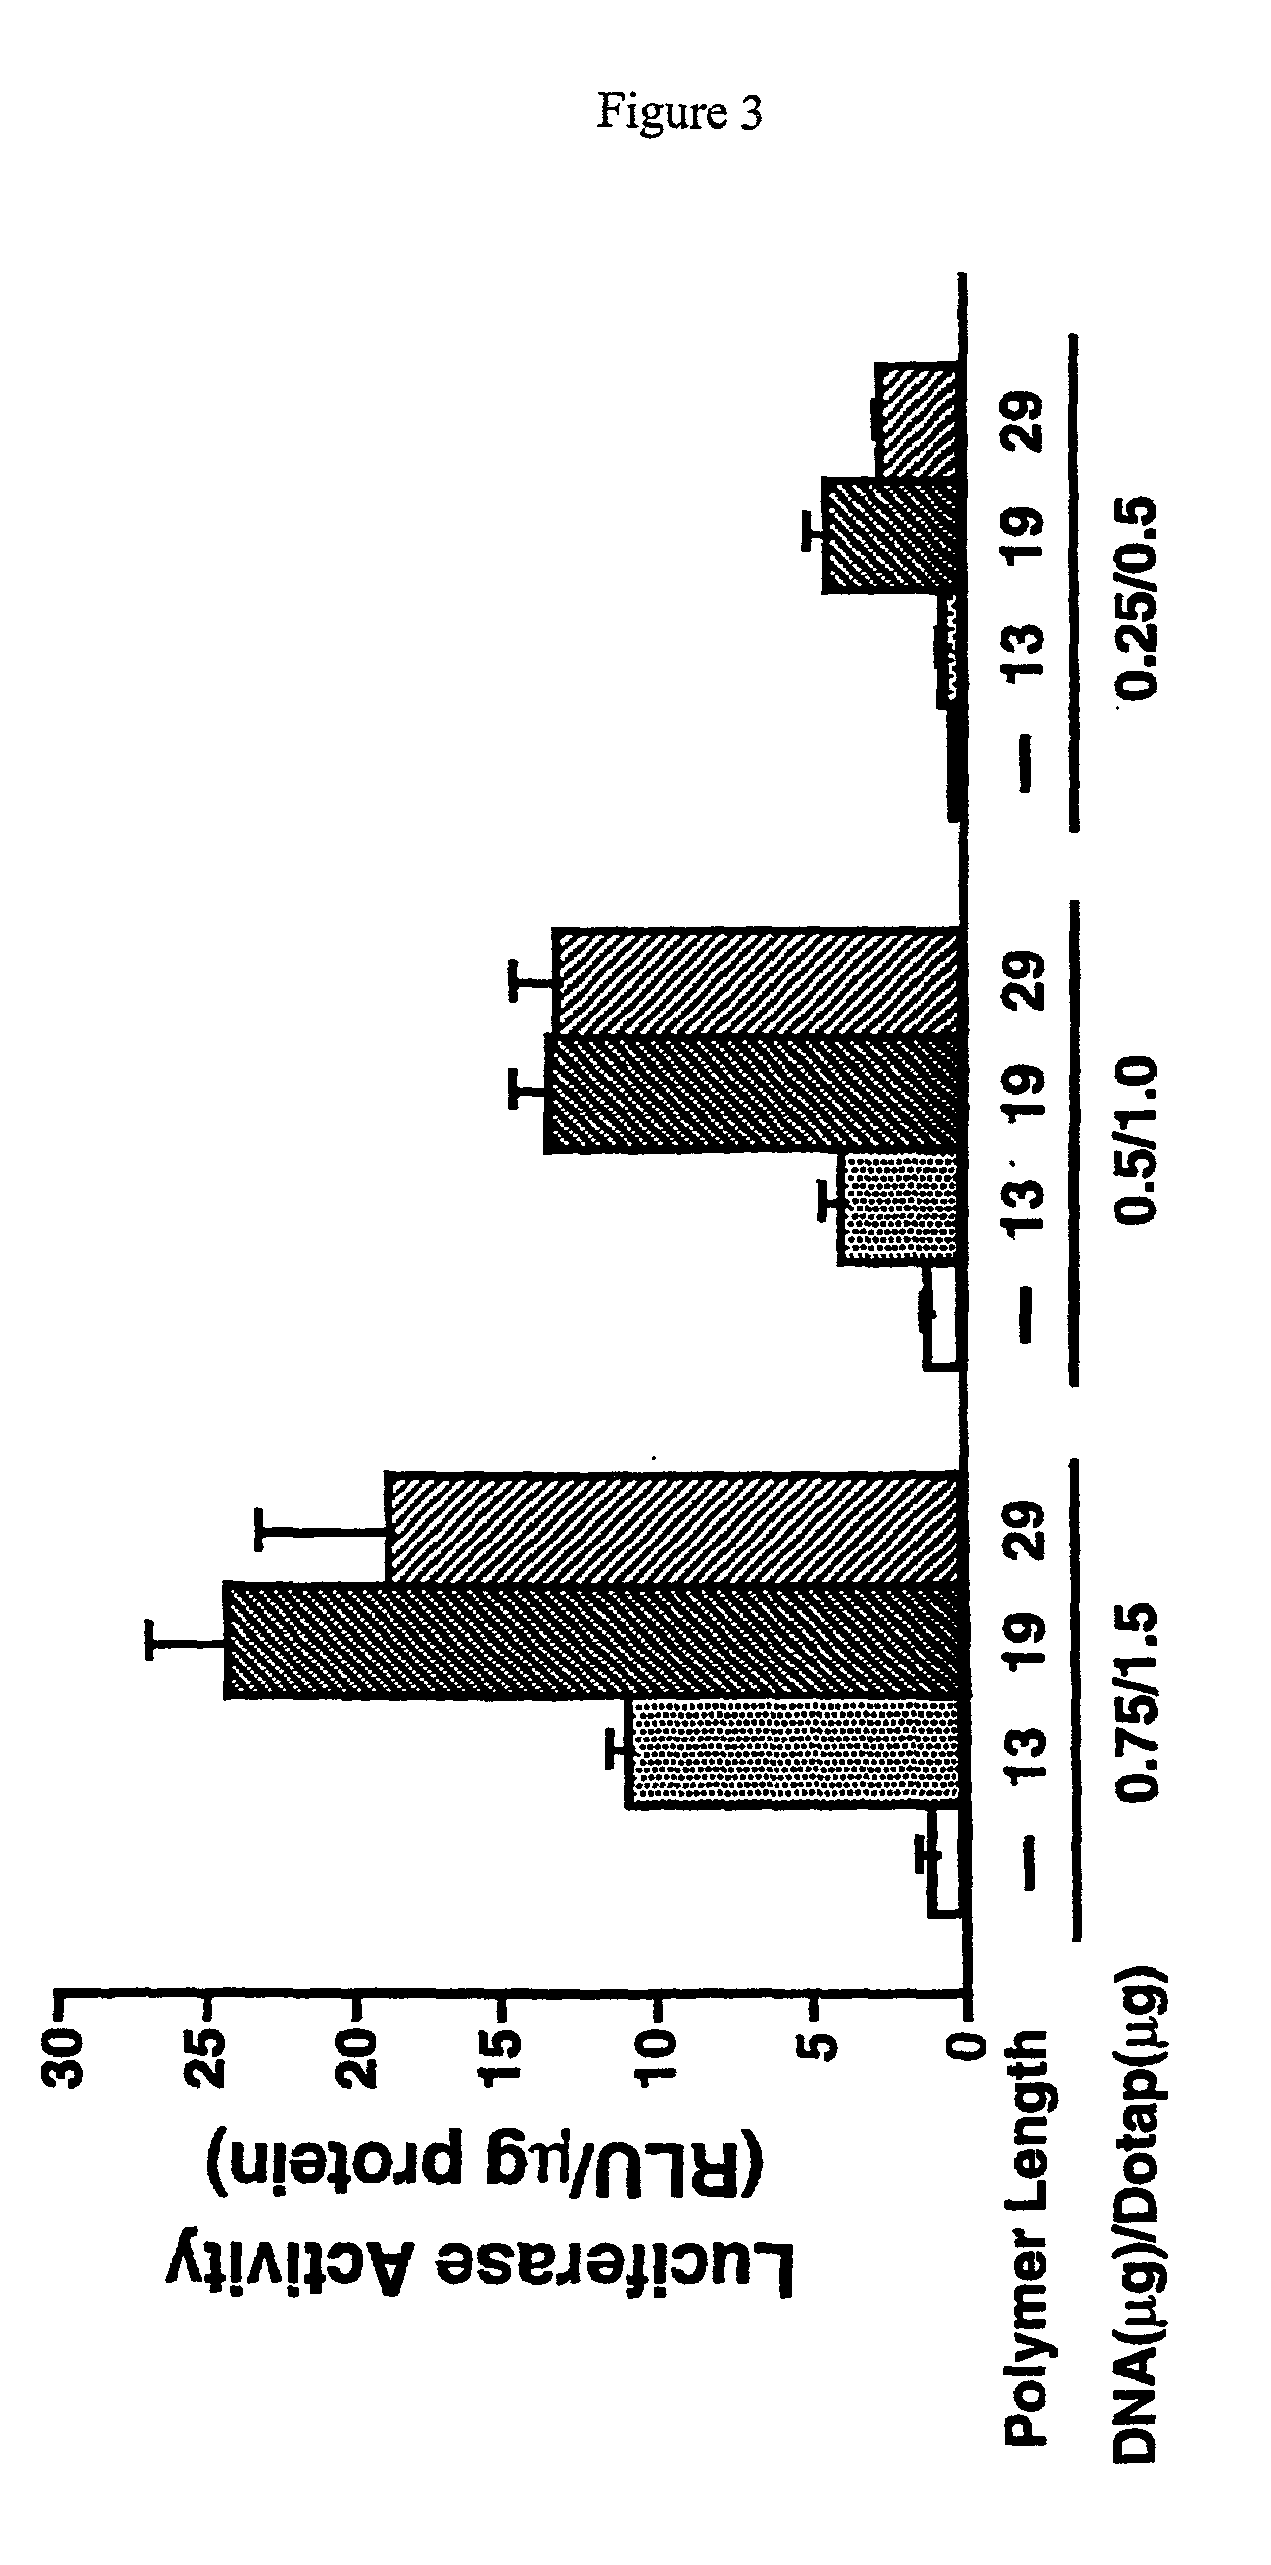 Histidine copolymer and methods for using same